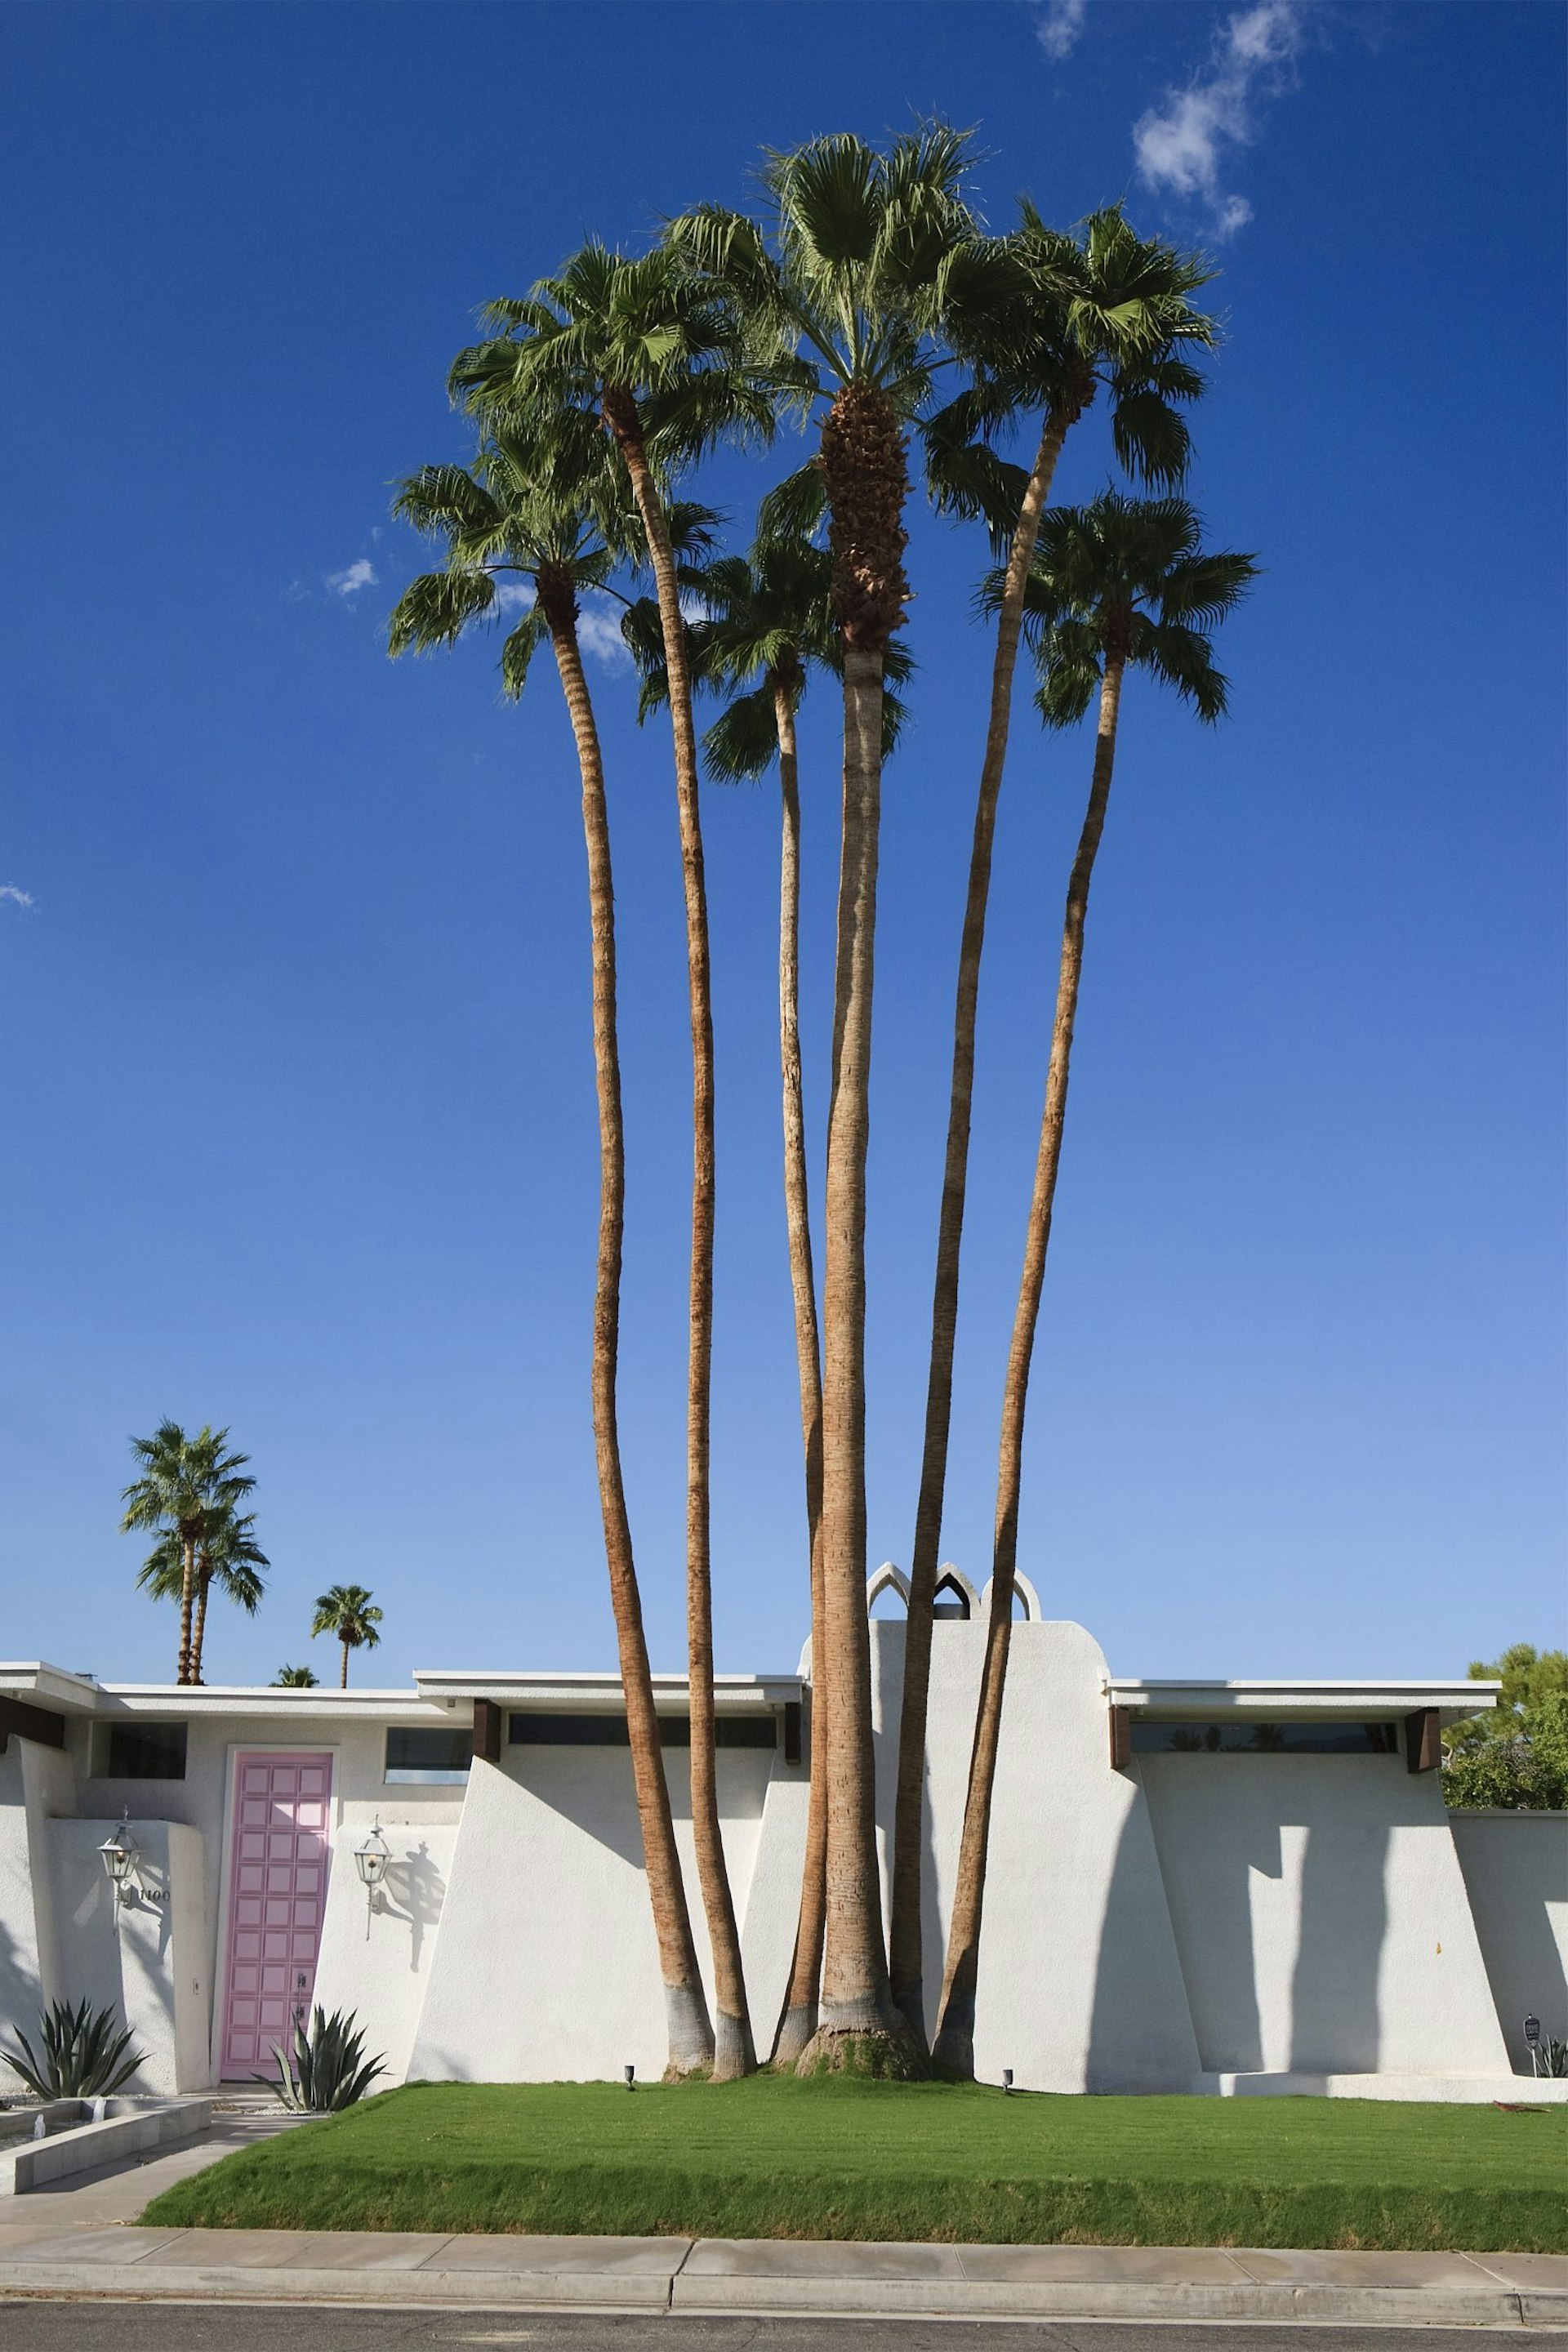 White mid-century modern house with a pink door and towering palm trees